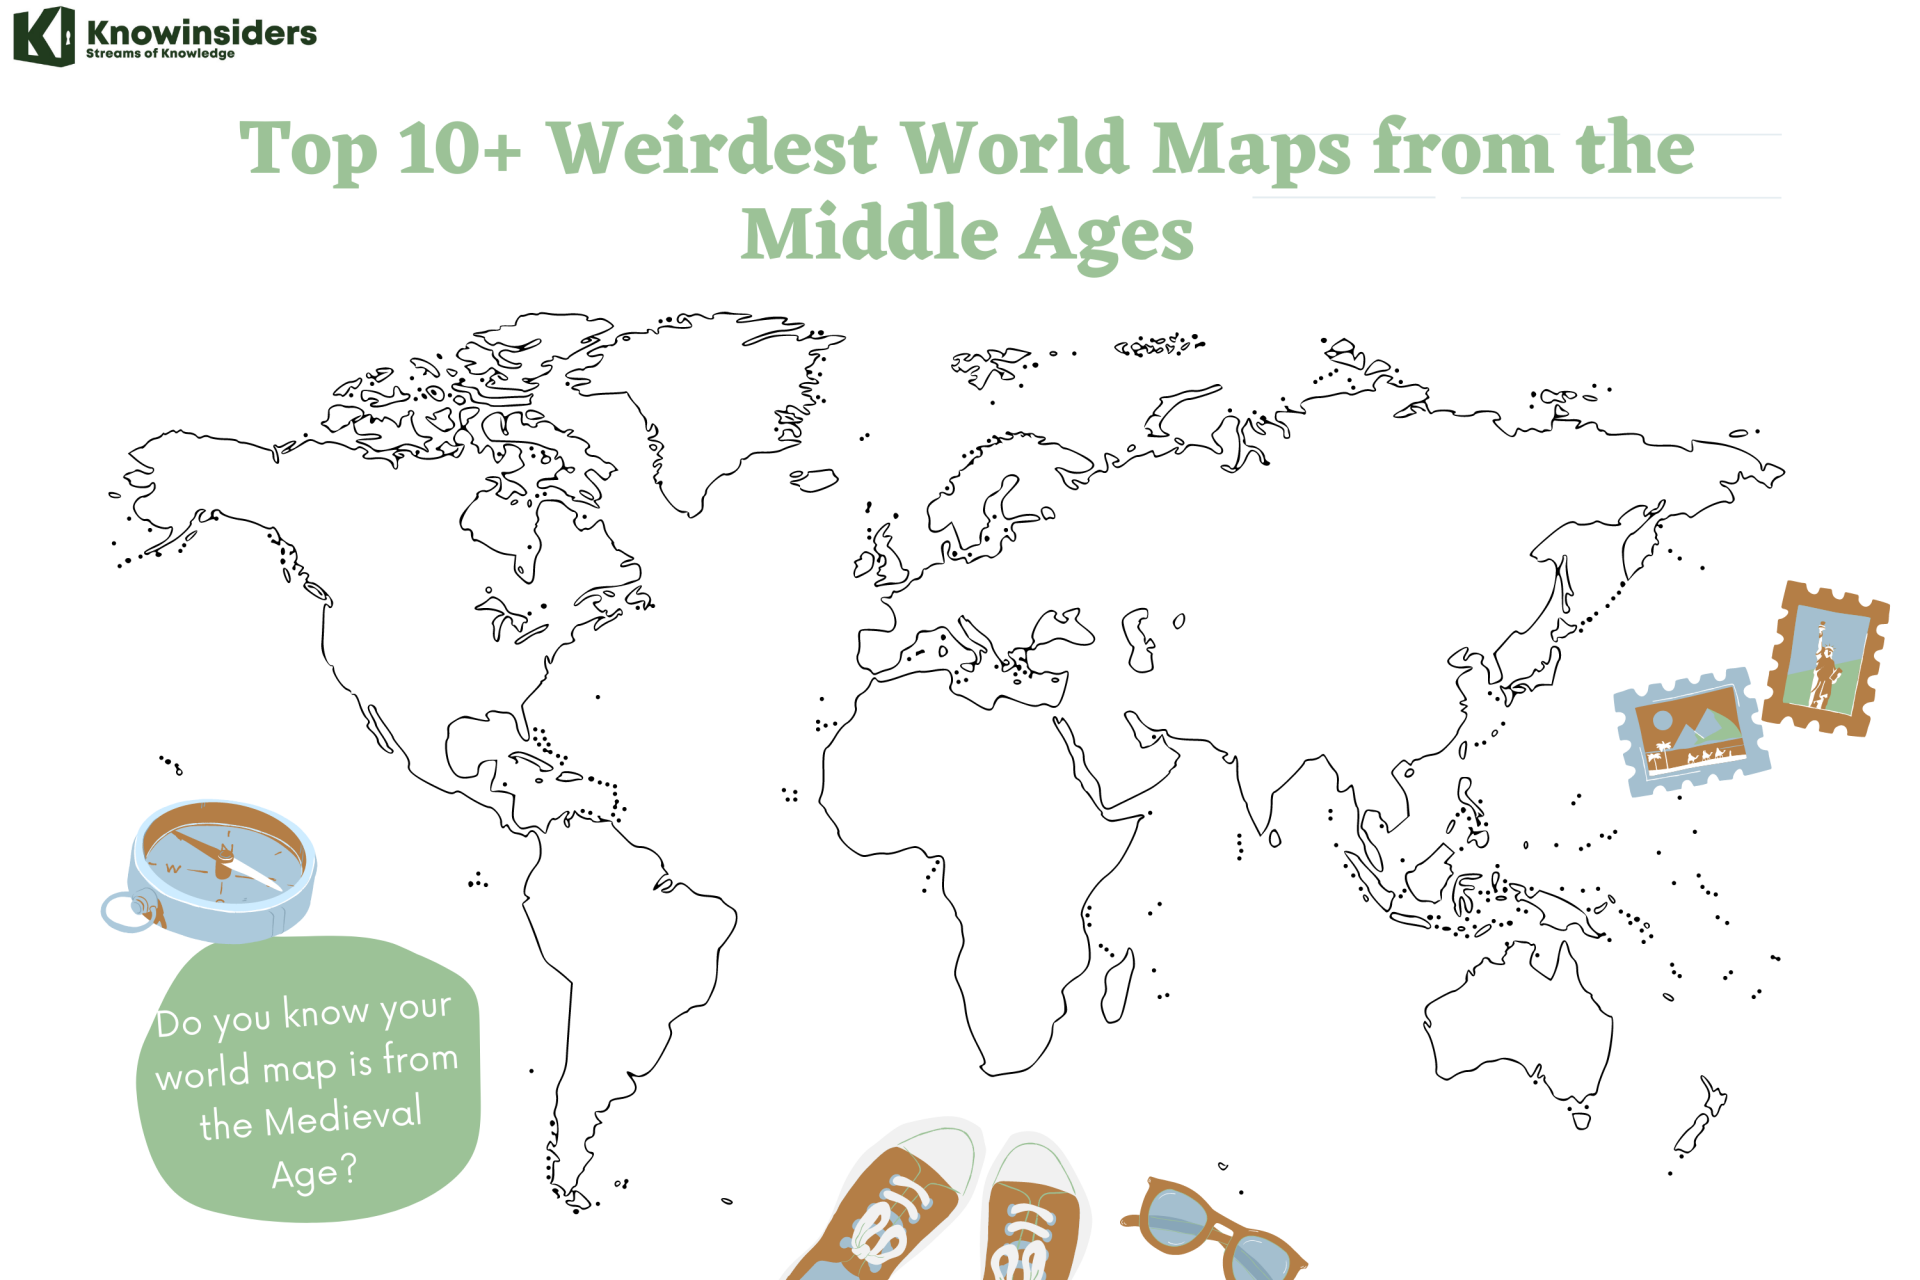 10+ Weirdest World Maps from the Middle Ages